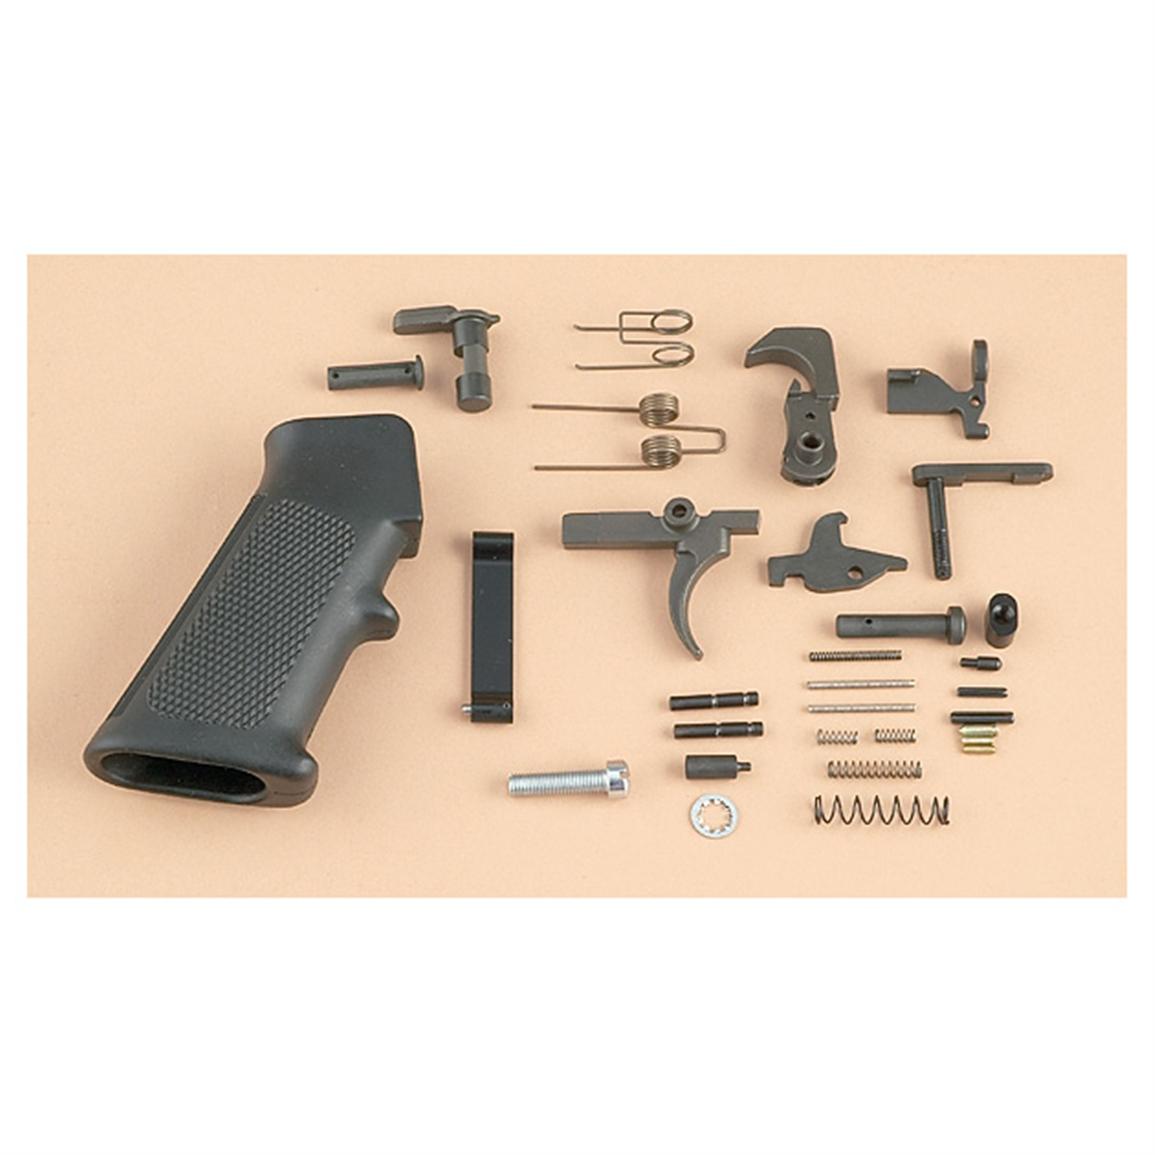 CMMG AR-15 Lower Receiver Parts Kit